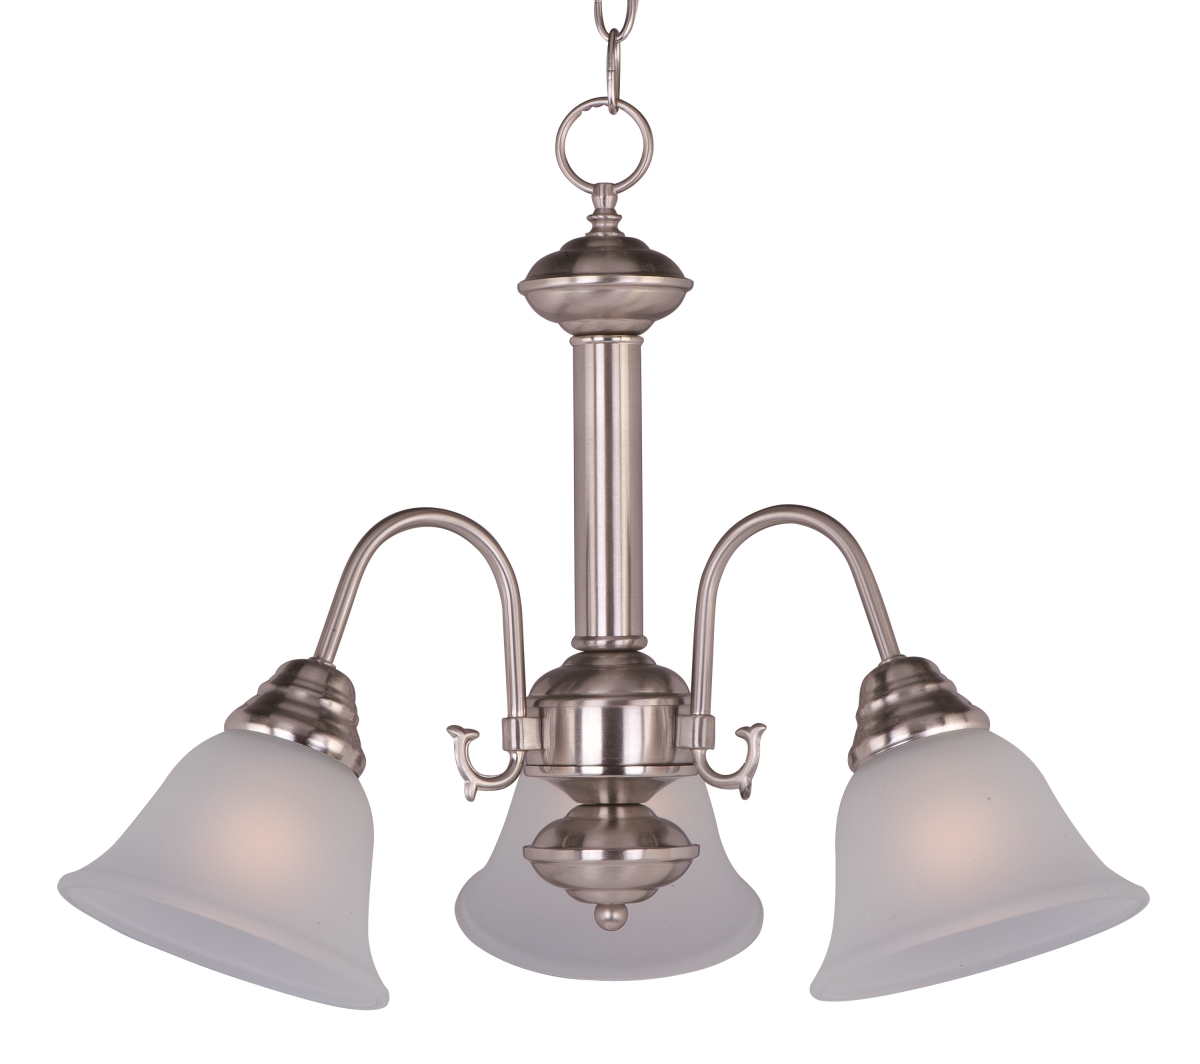 Picture of Maxim 2697FTSN 15.5 x 20 in. Malaga 3-Light Chandelier, Satin Nickel